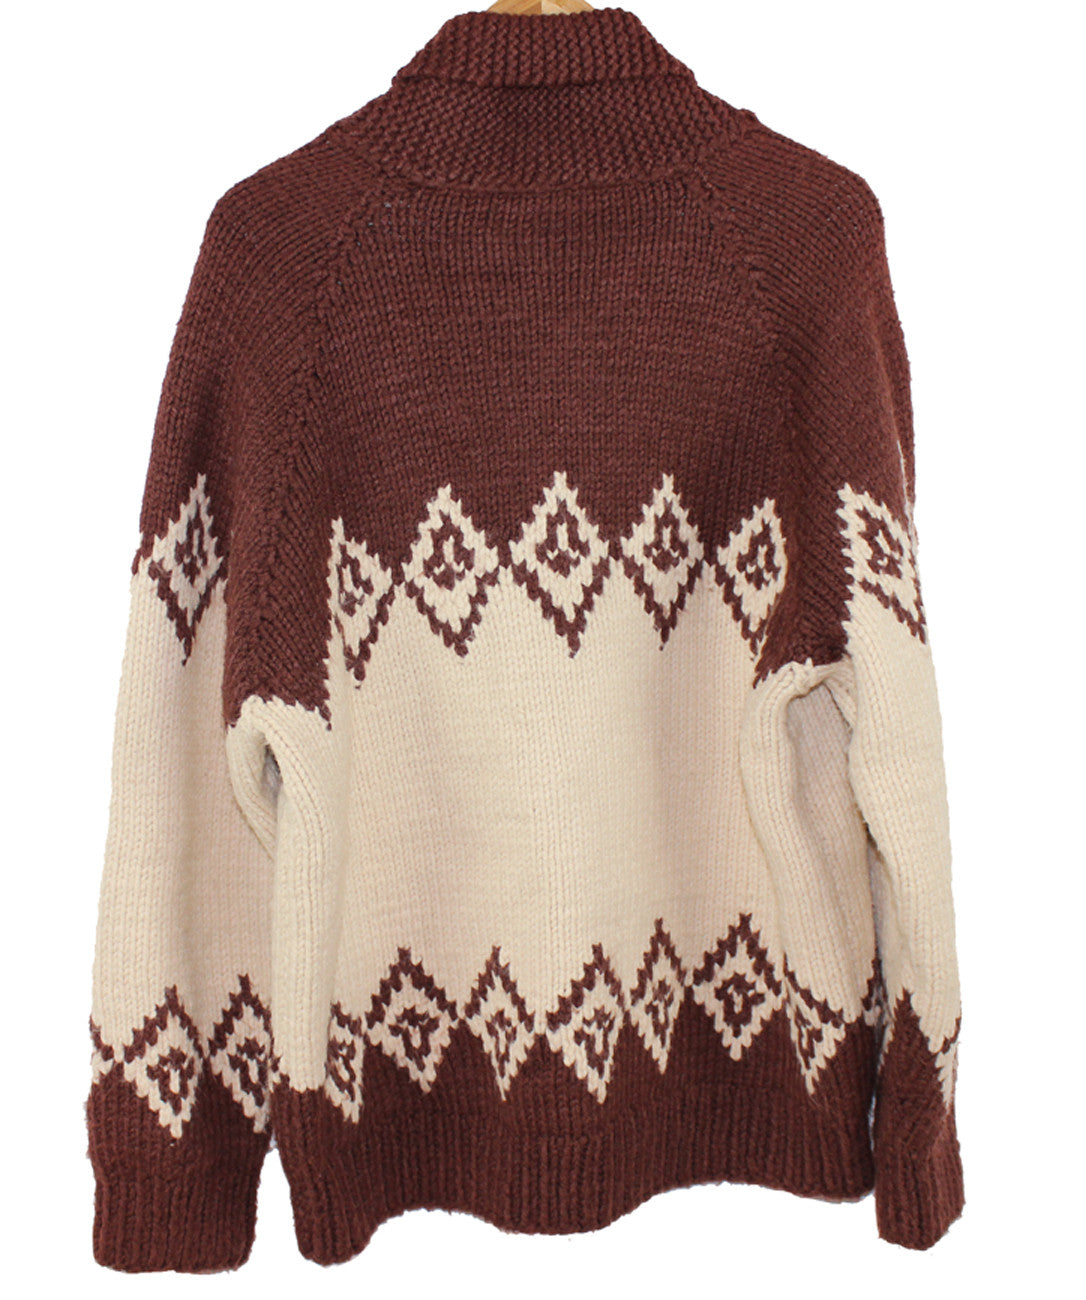 Brown and Cream Hand Knit Cowichan Sweater – Peyote Moon